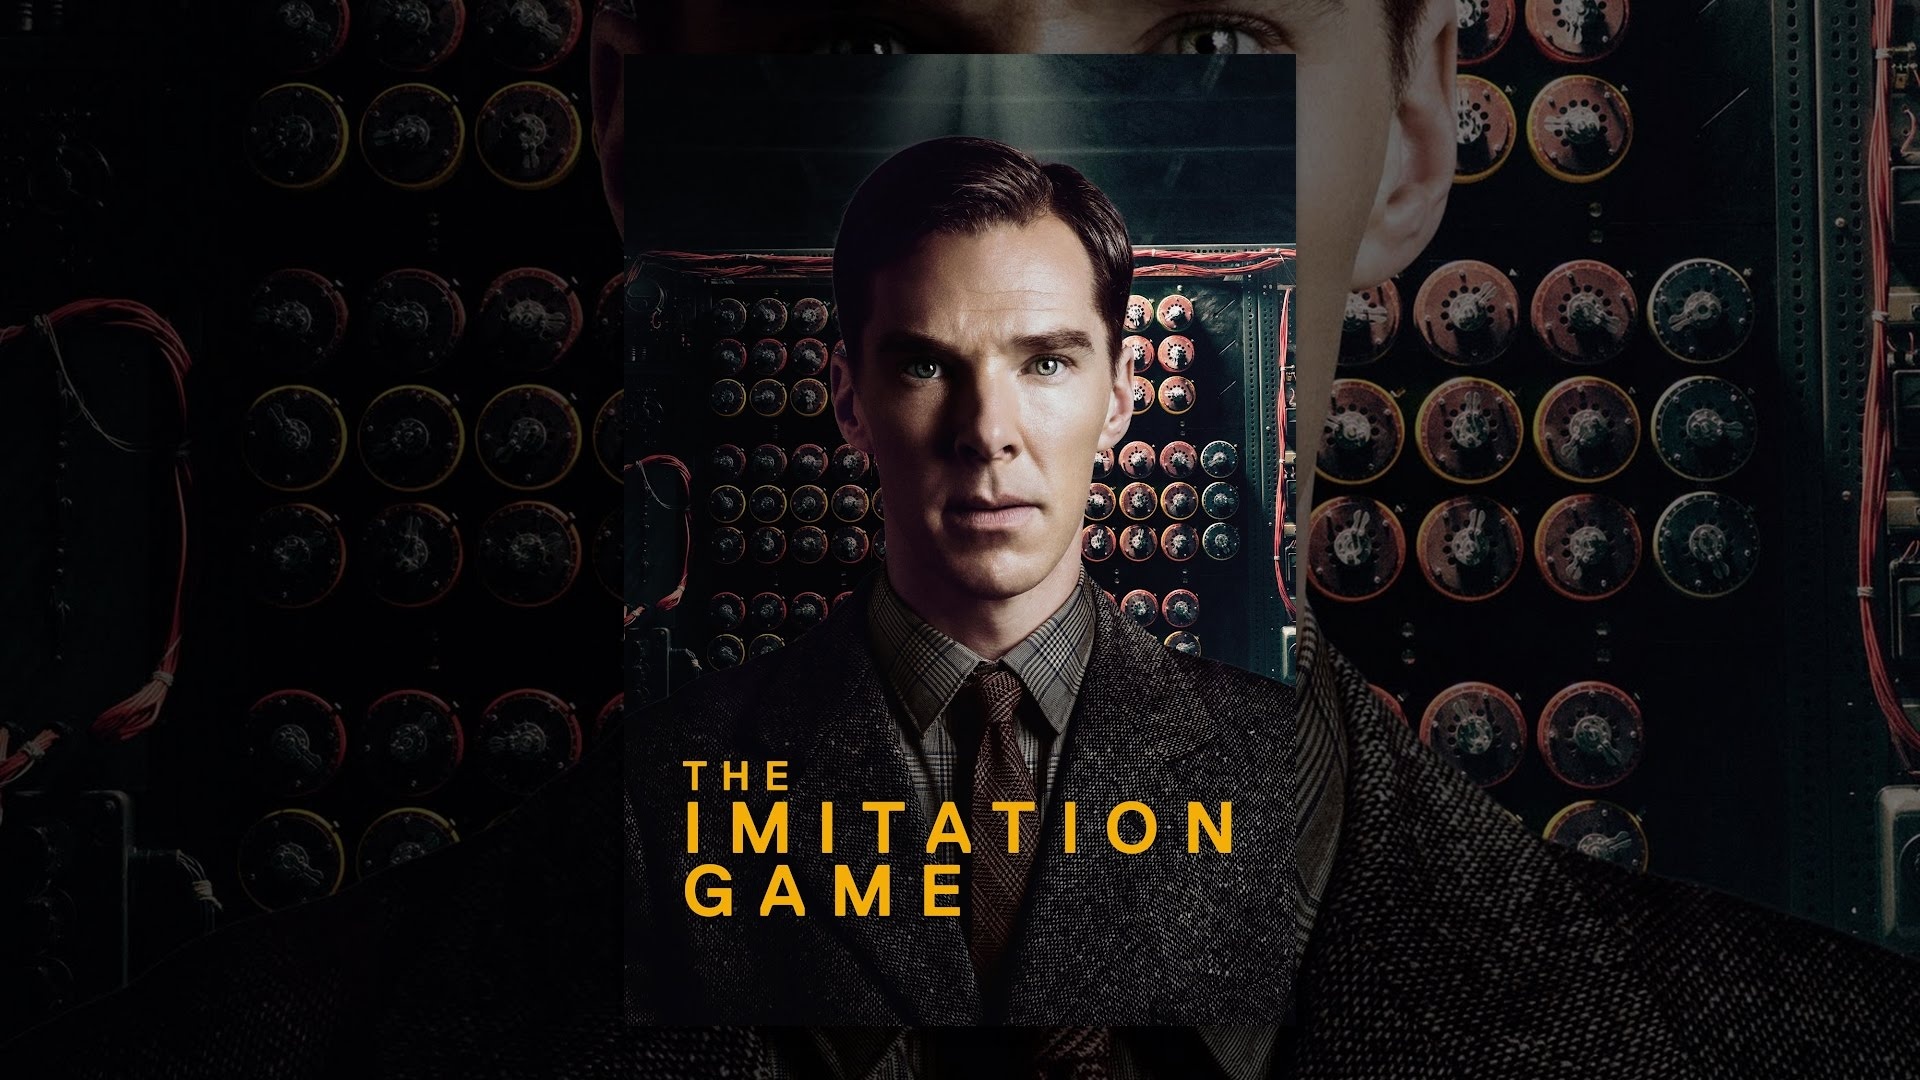 The Imitation Game: A key figure in cracking Nazi Germany's naval Enigma code, which helped the Allies win the Second World War. 1920x1080 Full HD Wallpaper.